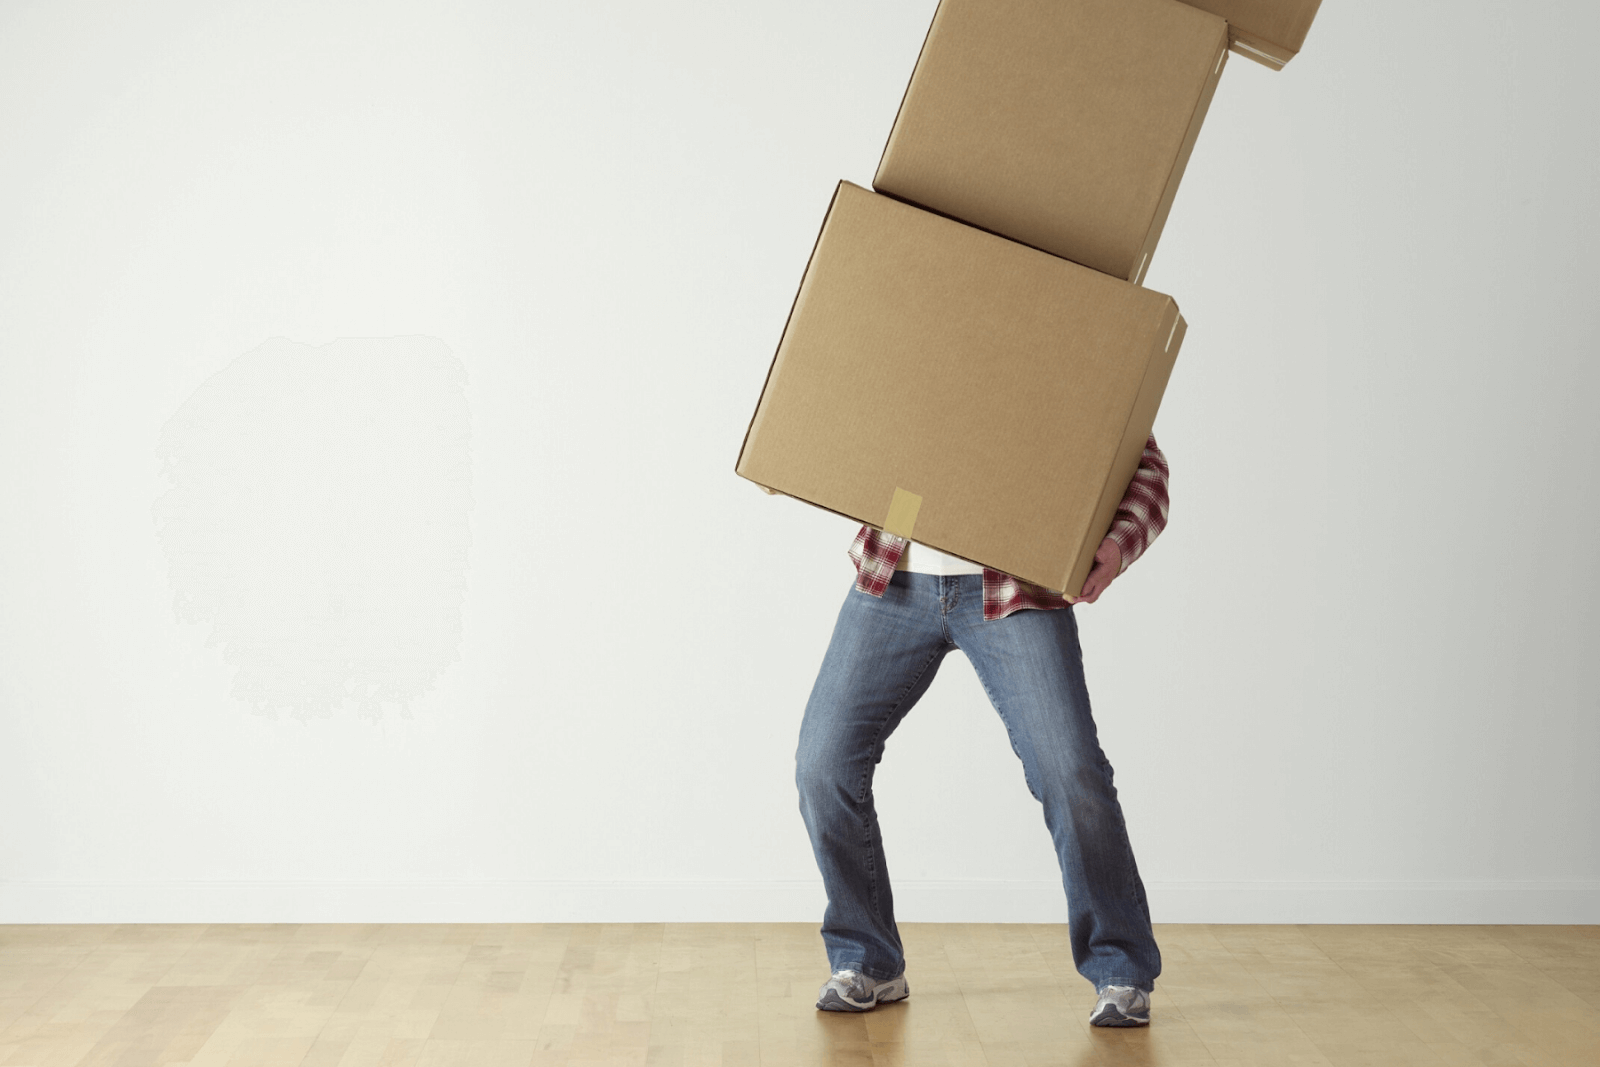 A man trying to move boxes by himself